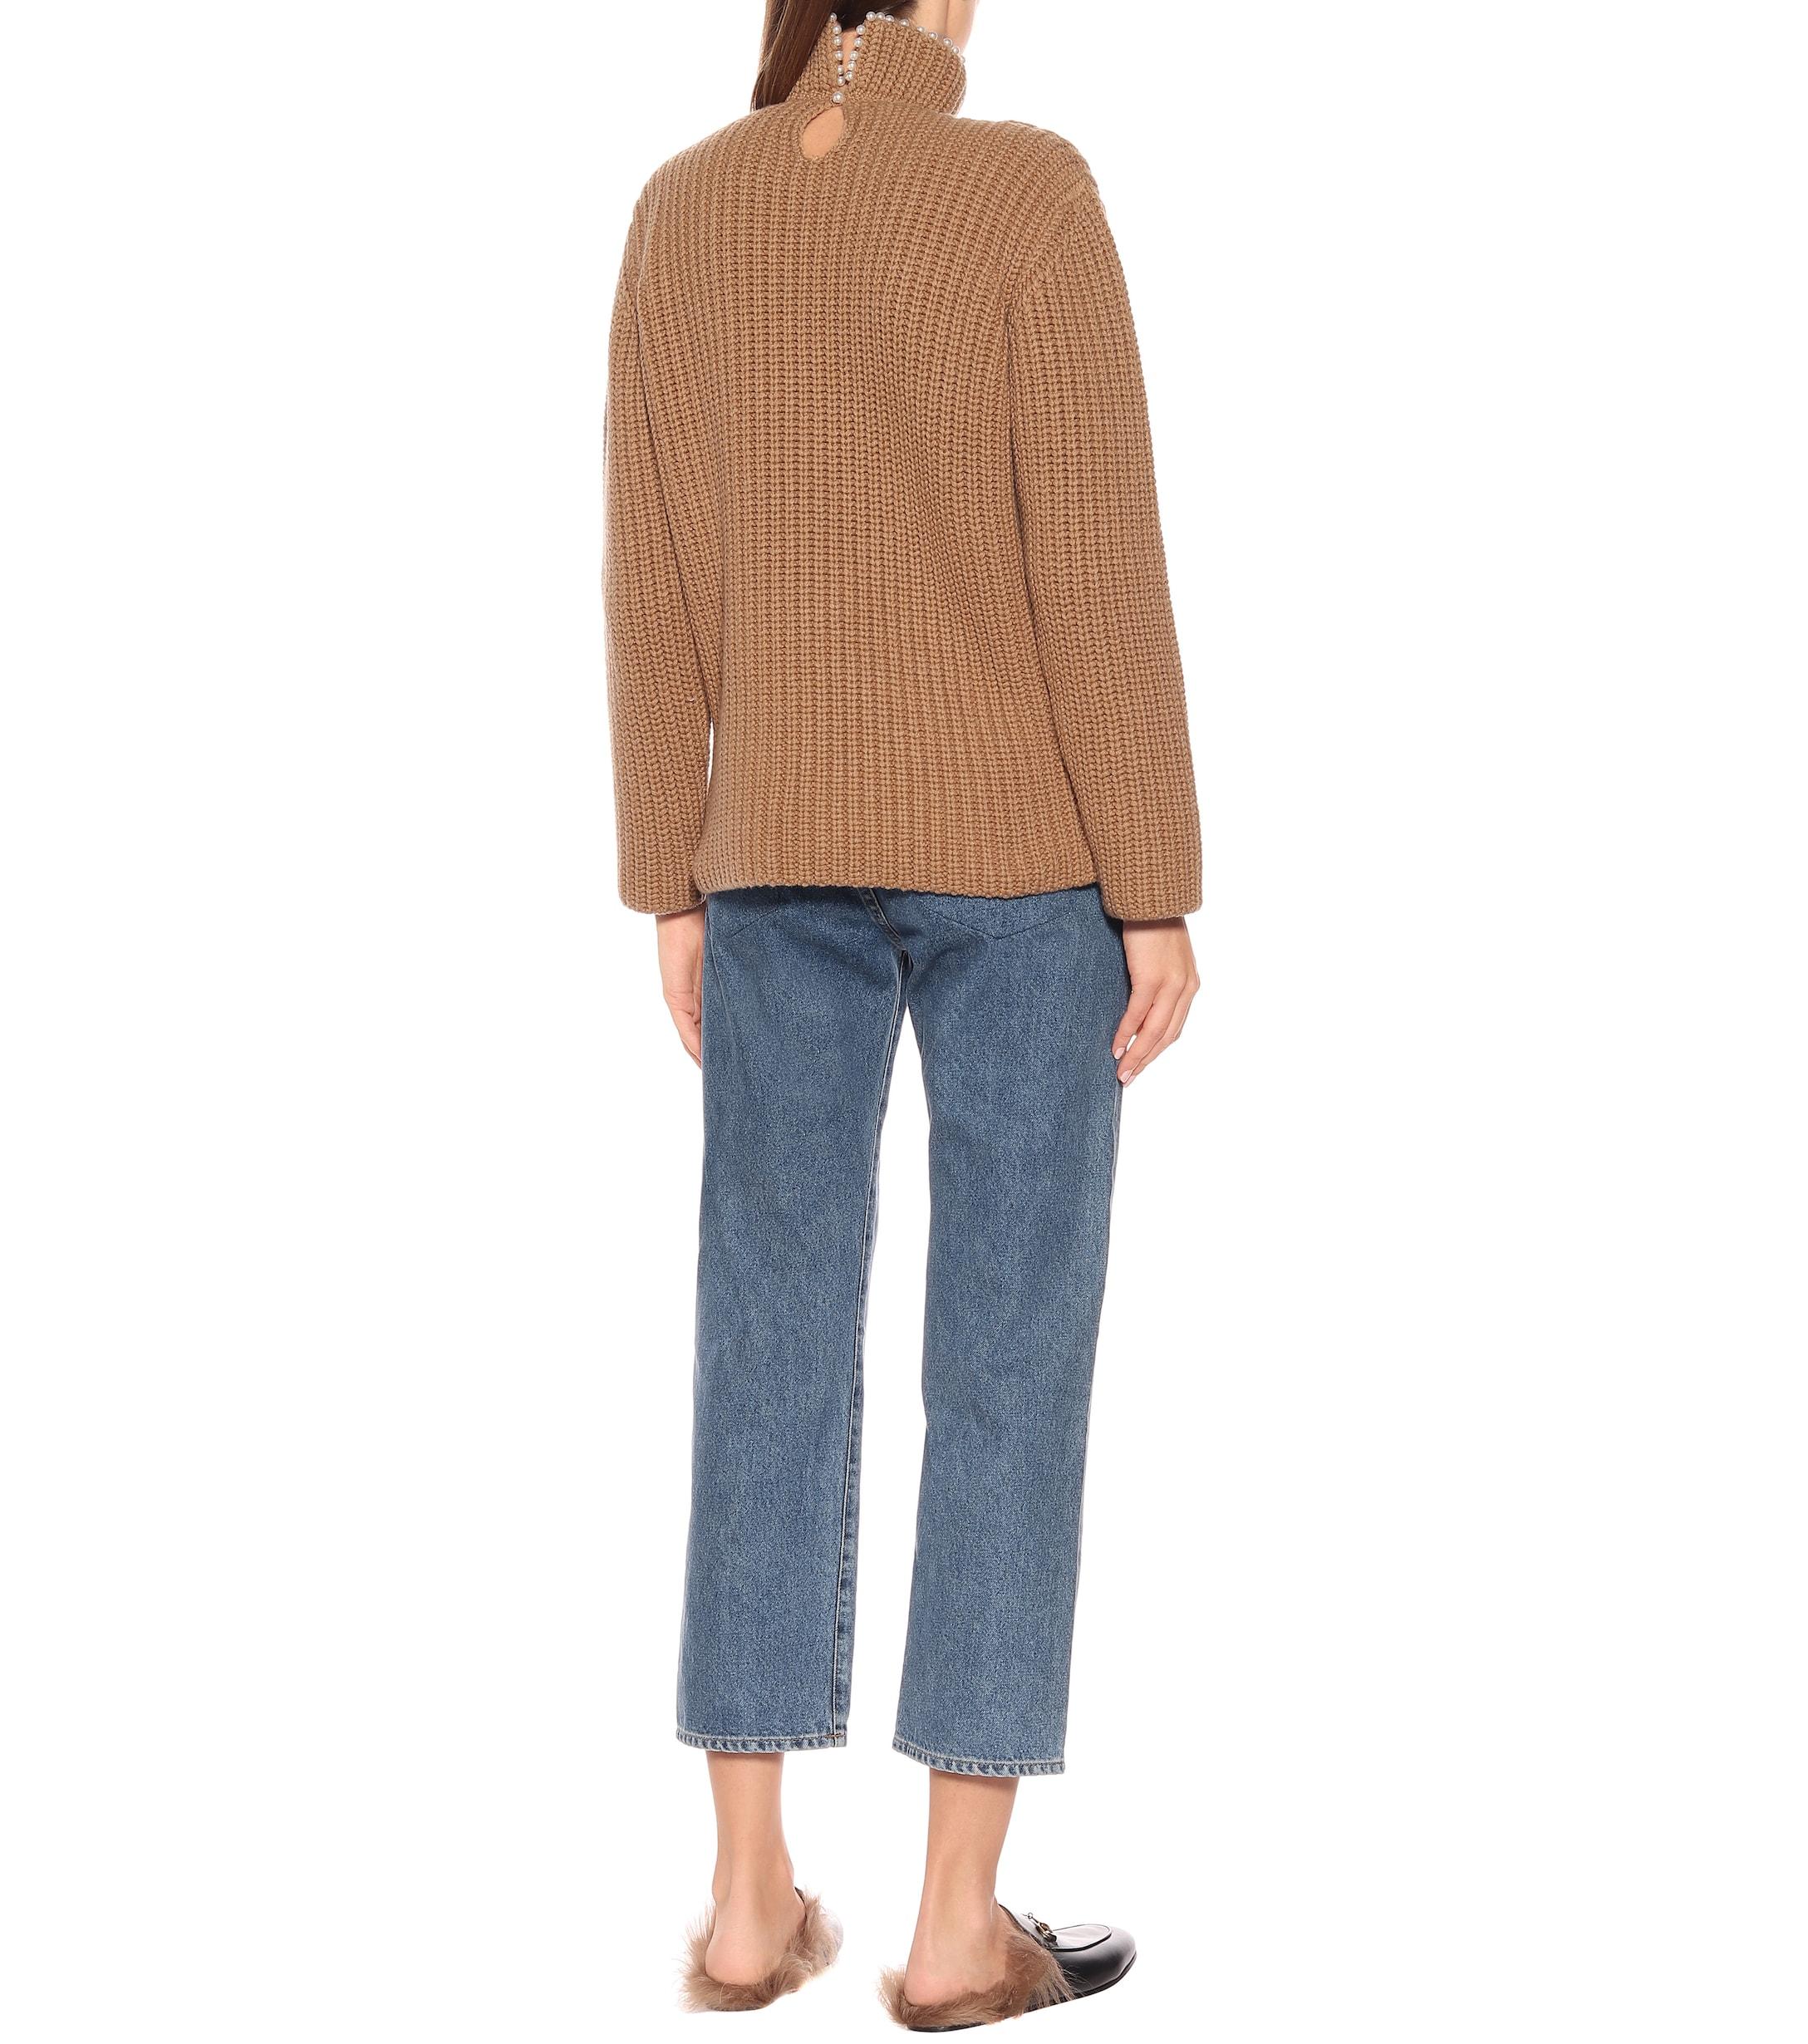 Loewe Embellished Cashmere Sweater in Beige (Natural) - Lyst